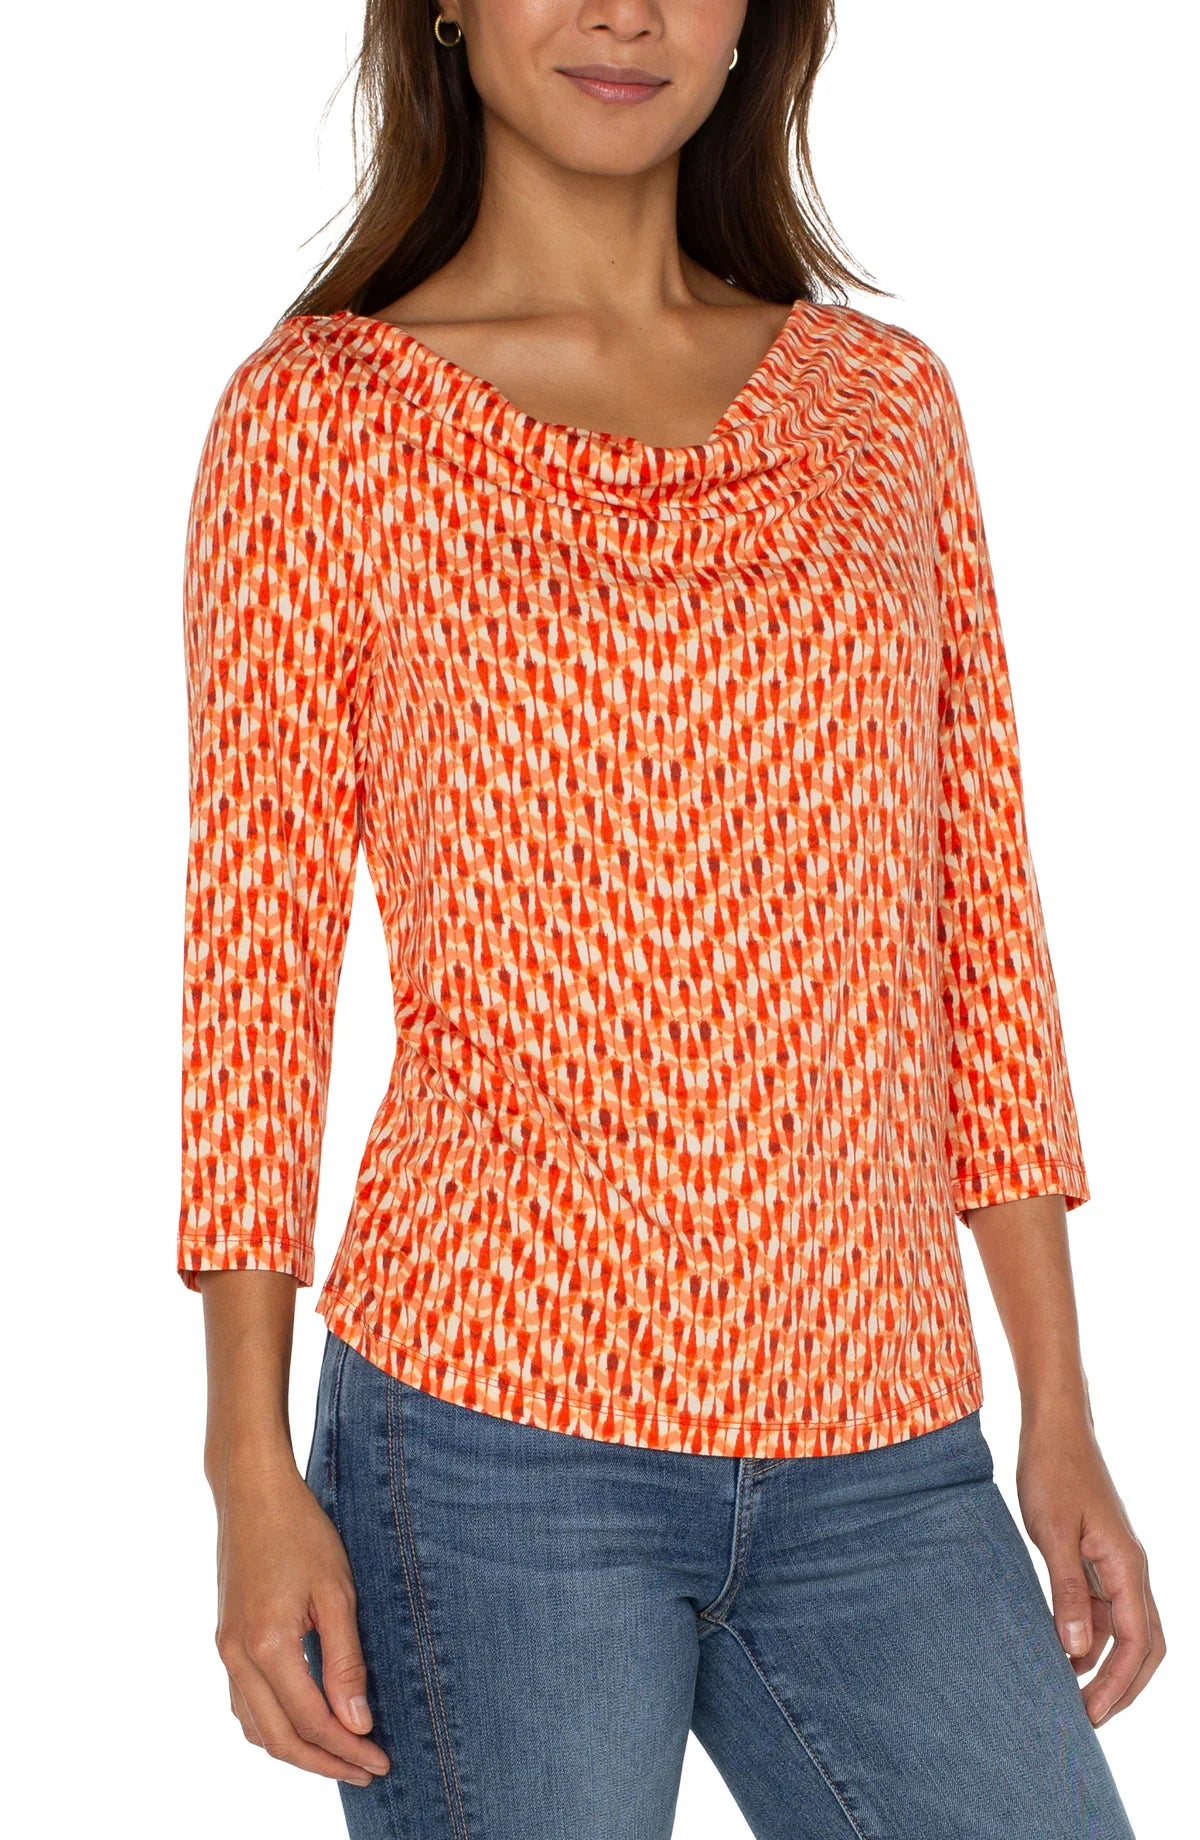 Cowl Neck Top with 3/4 Length Sleeves - Coral Blaze Ikat